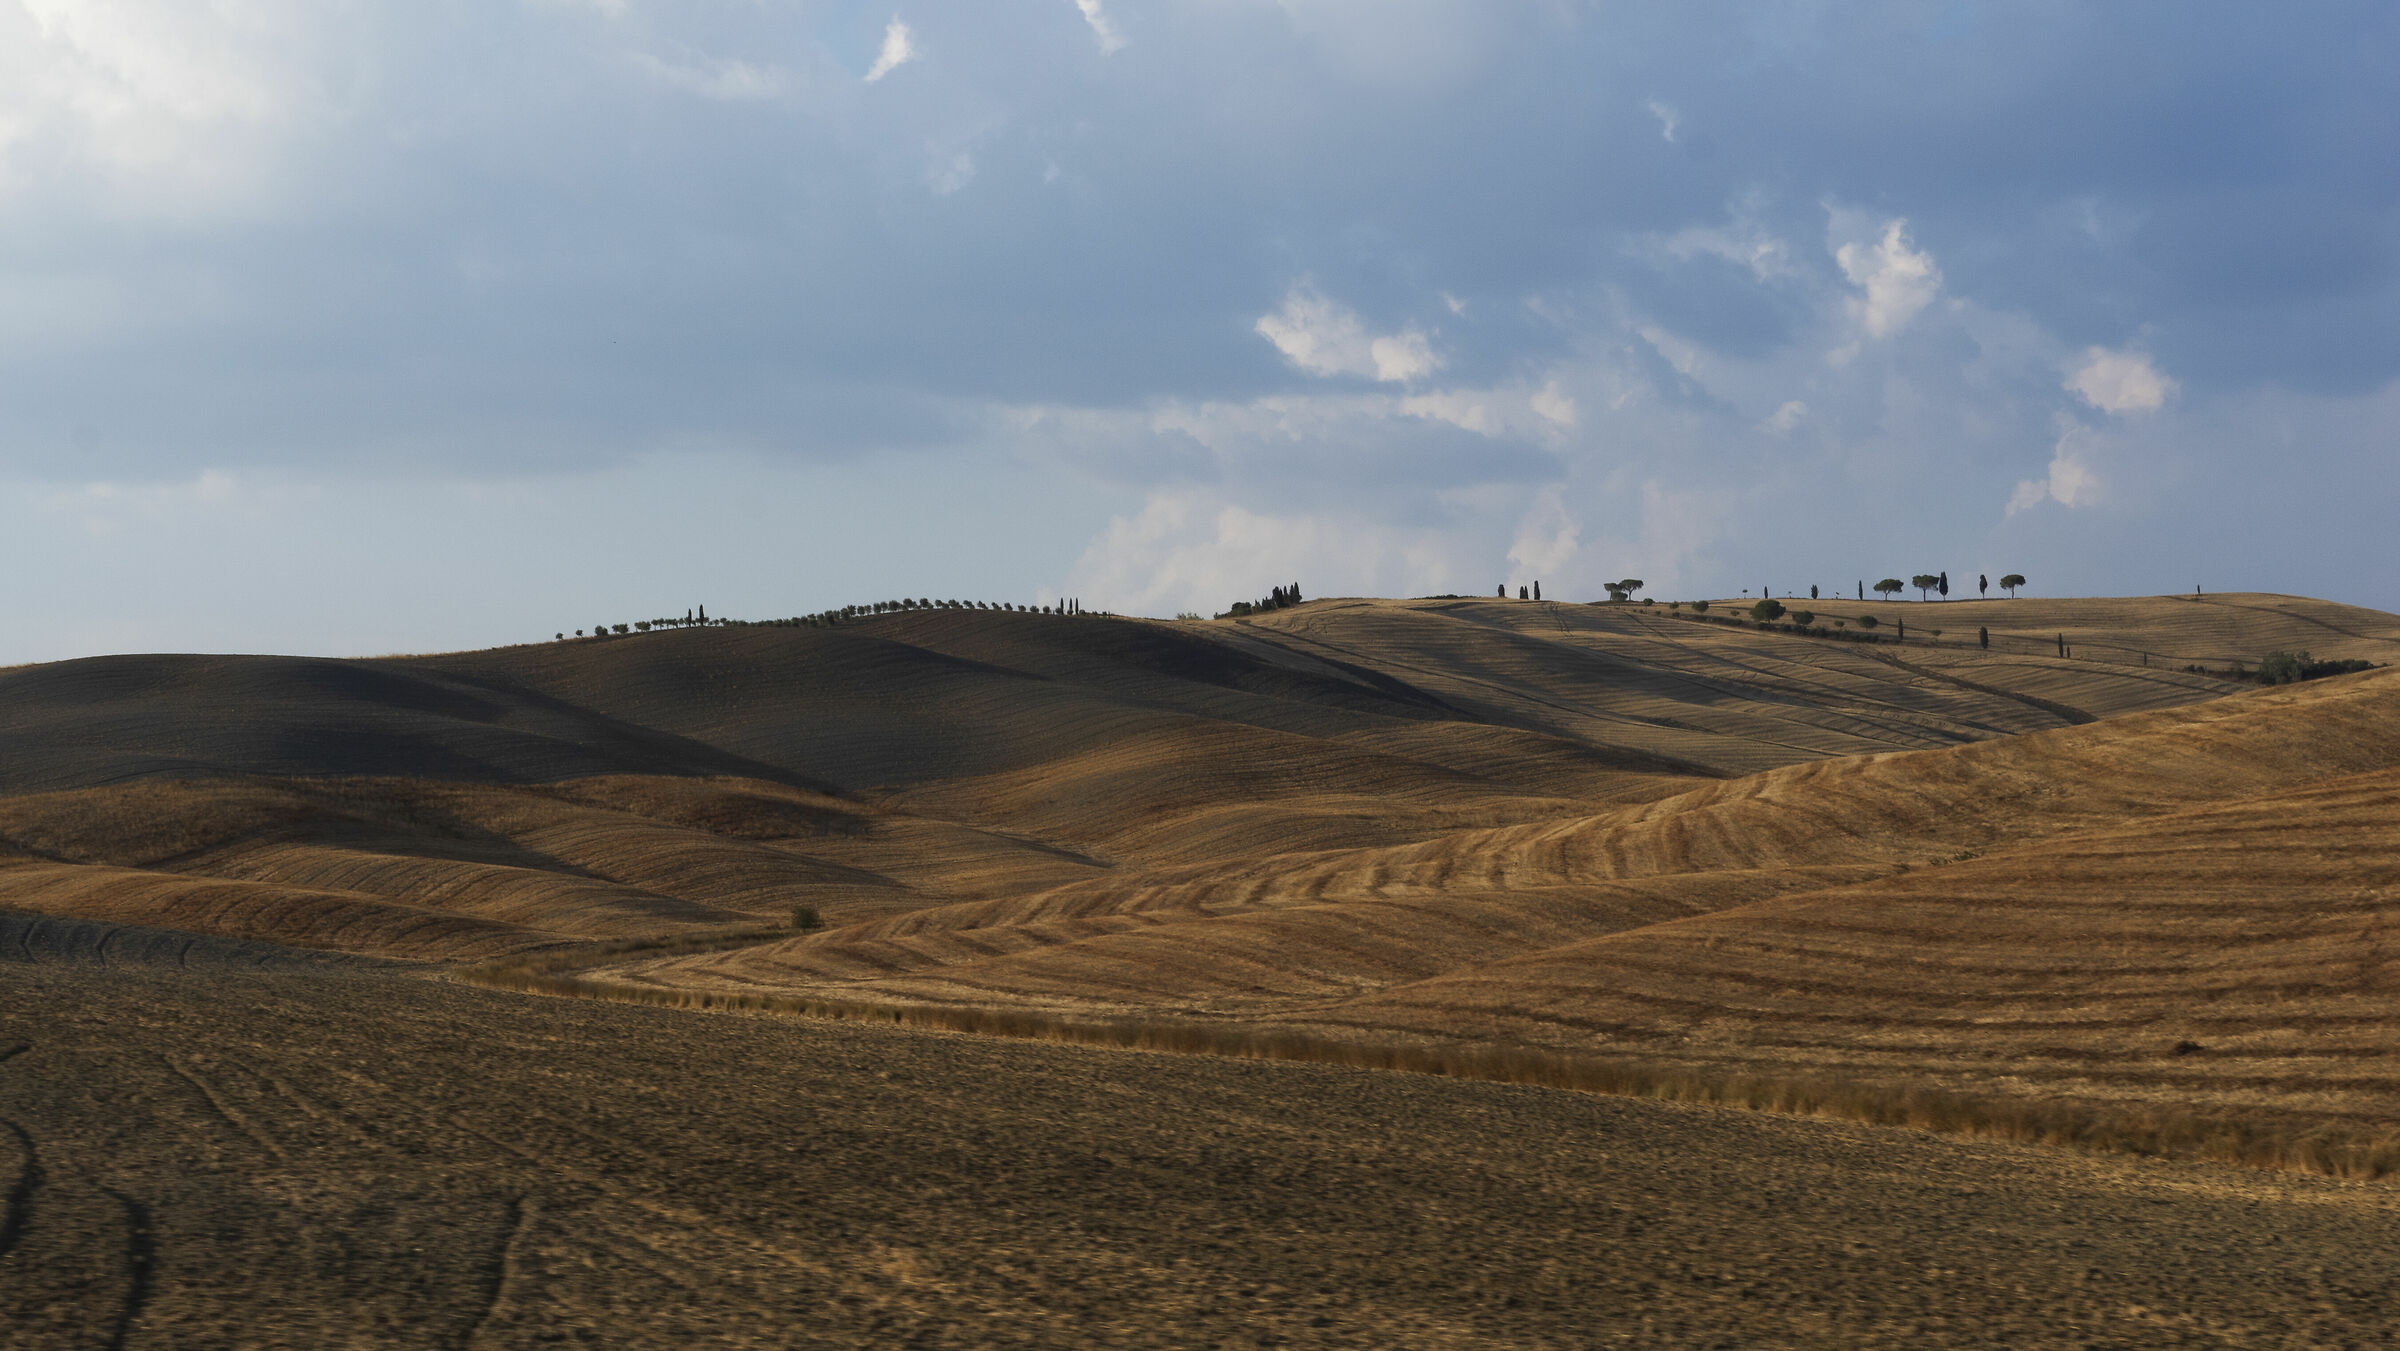 Val d'orcia...